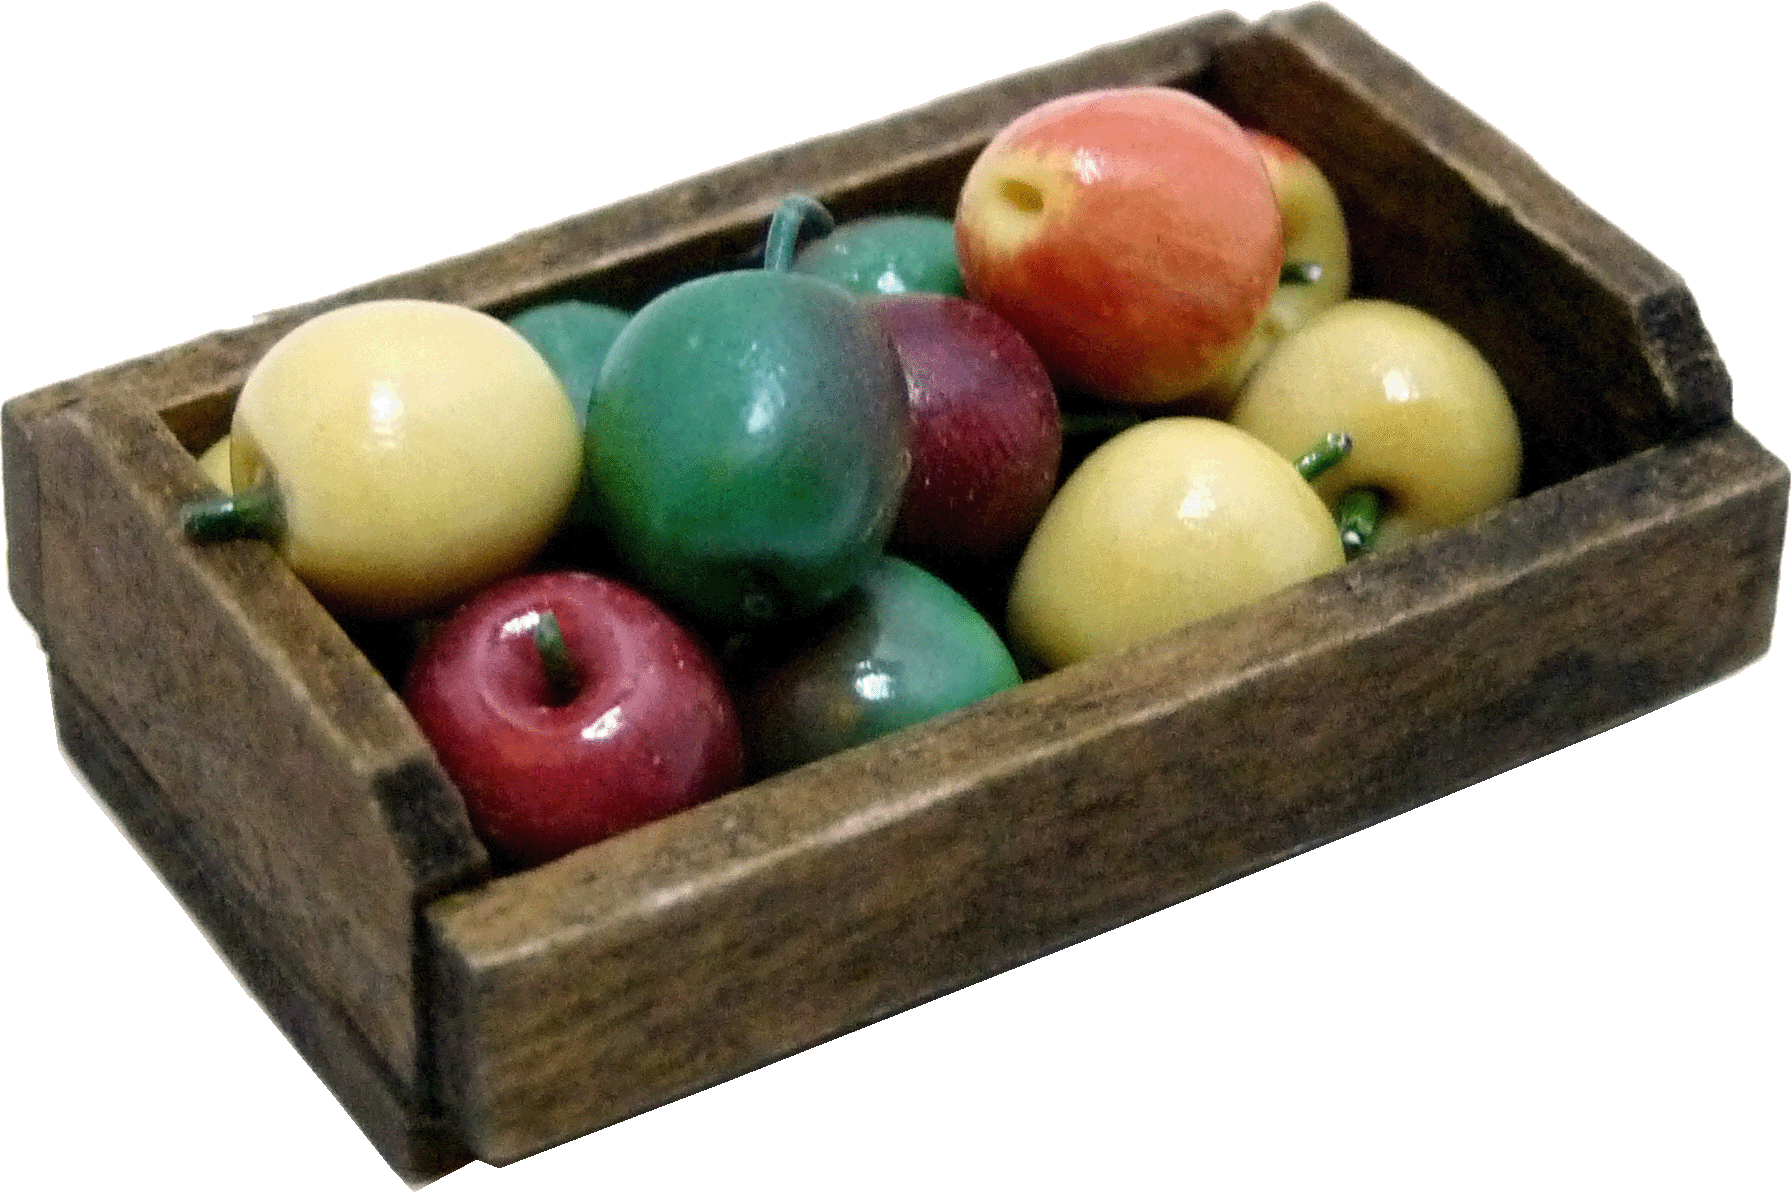 Assorted Apples in Crate